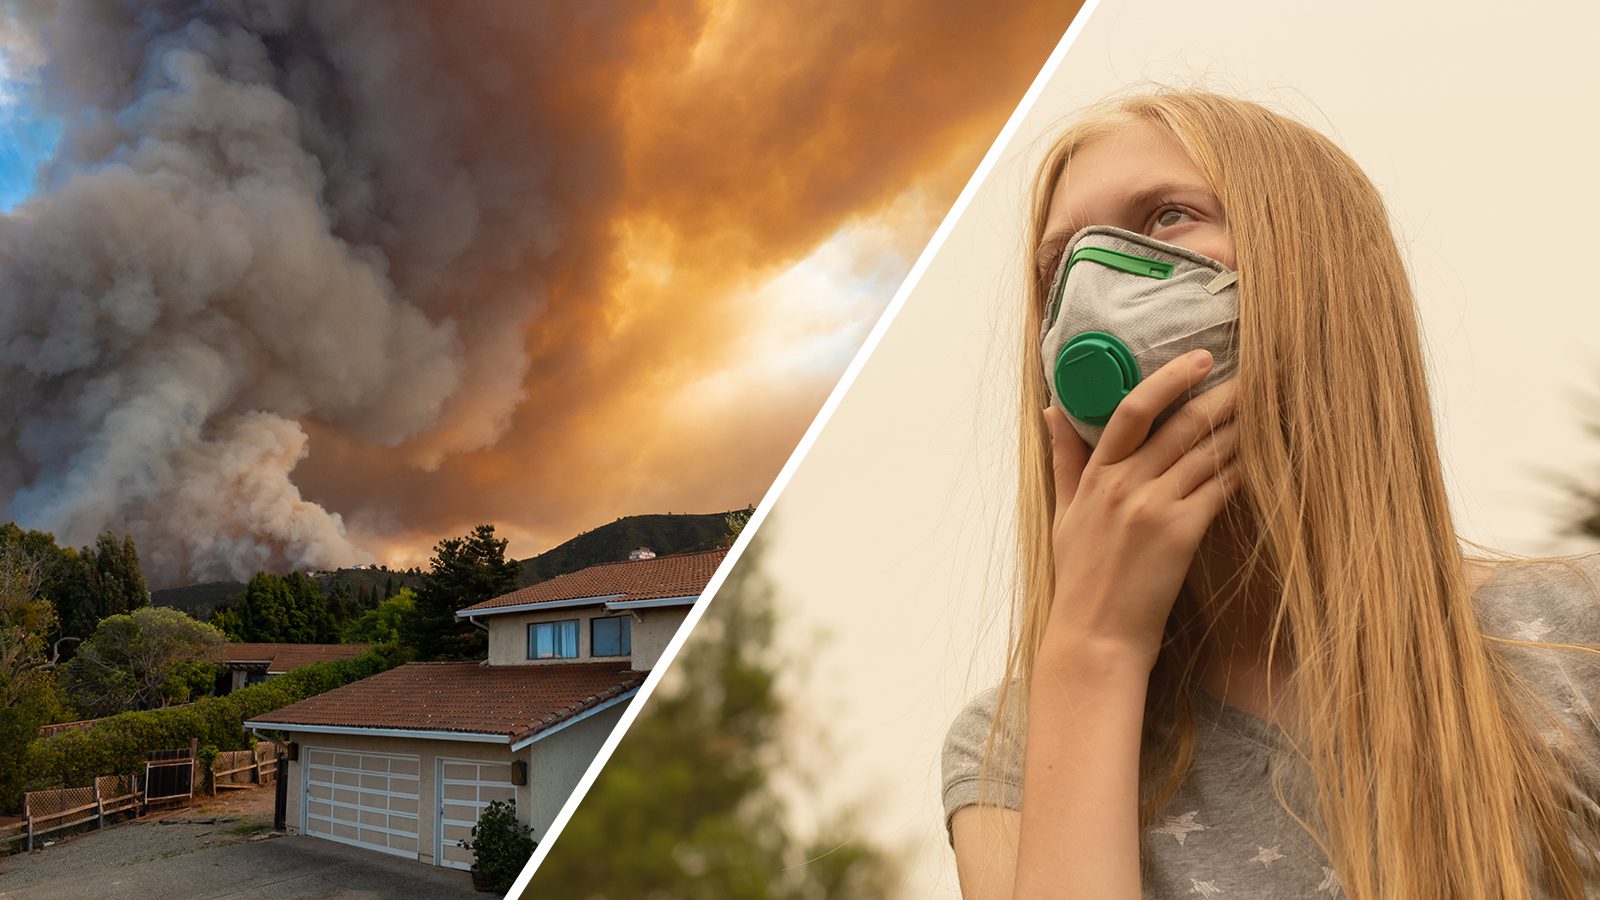 How to Protect Yourself From Wildfire Smoke